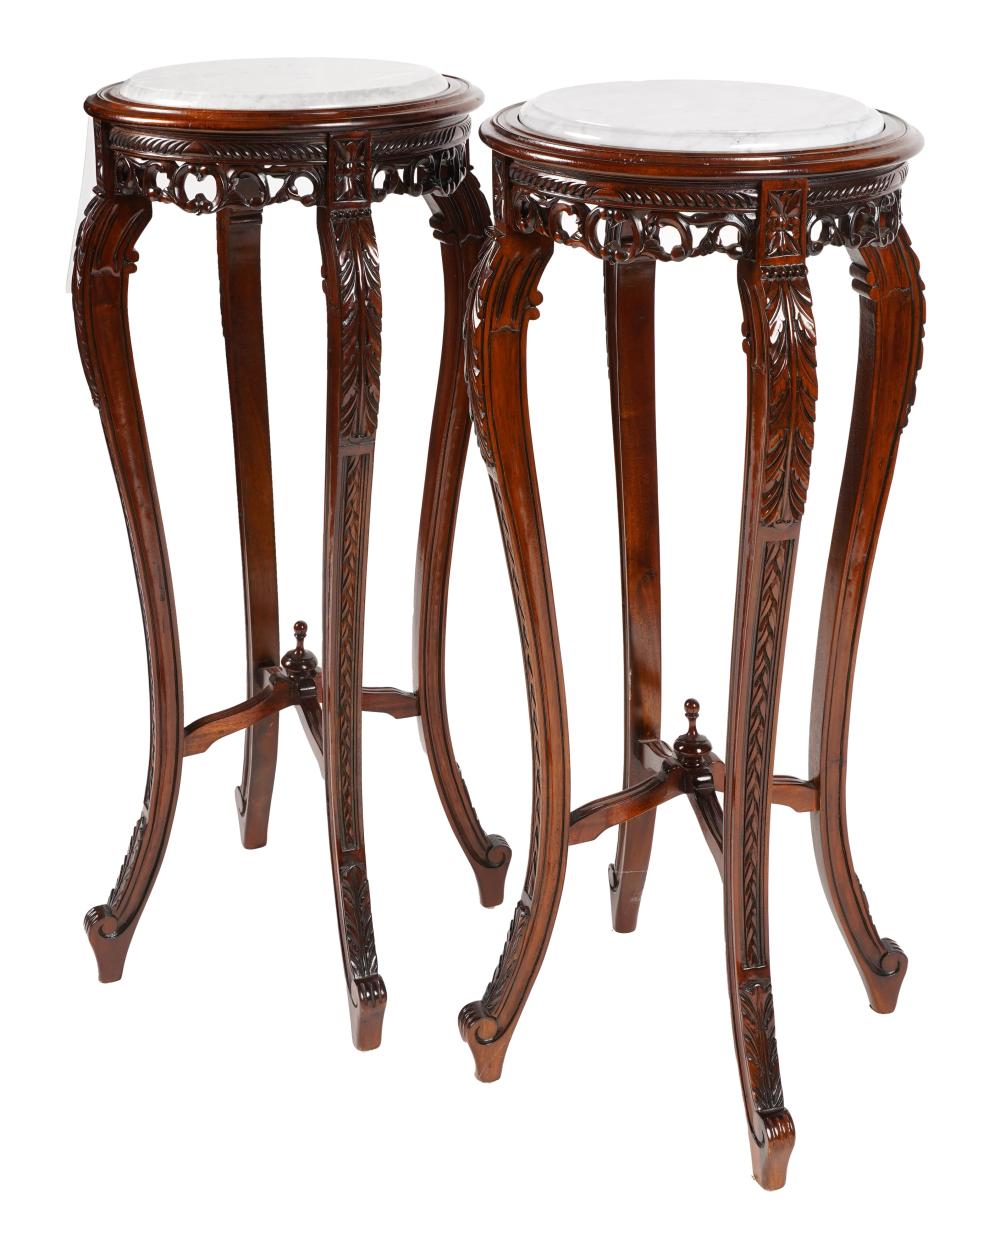 PAIR OF CARVED MAHOGANY STANDSeach